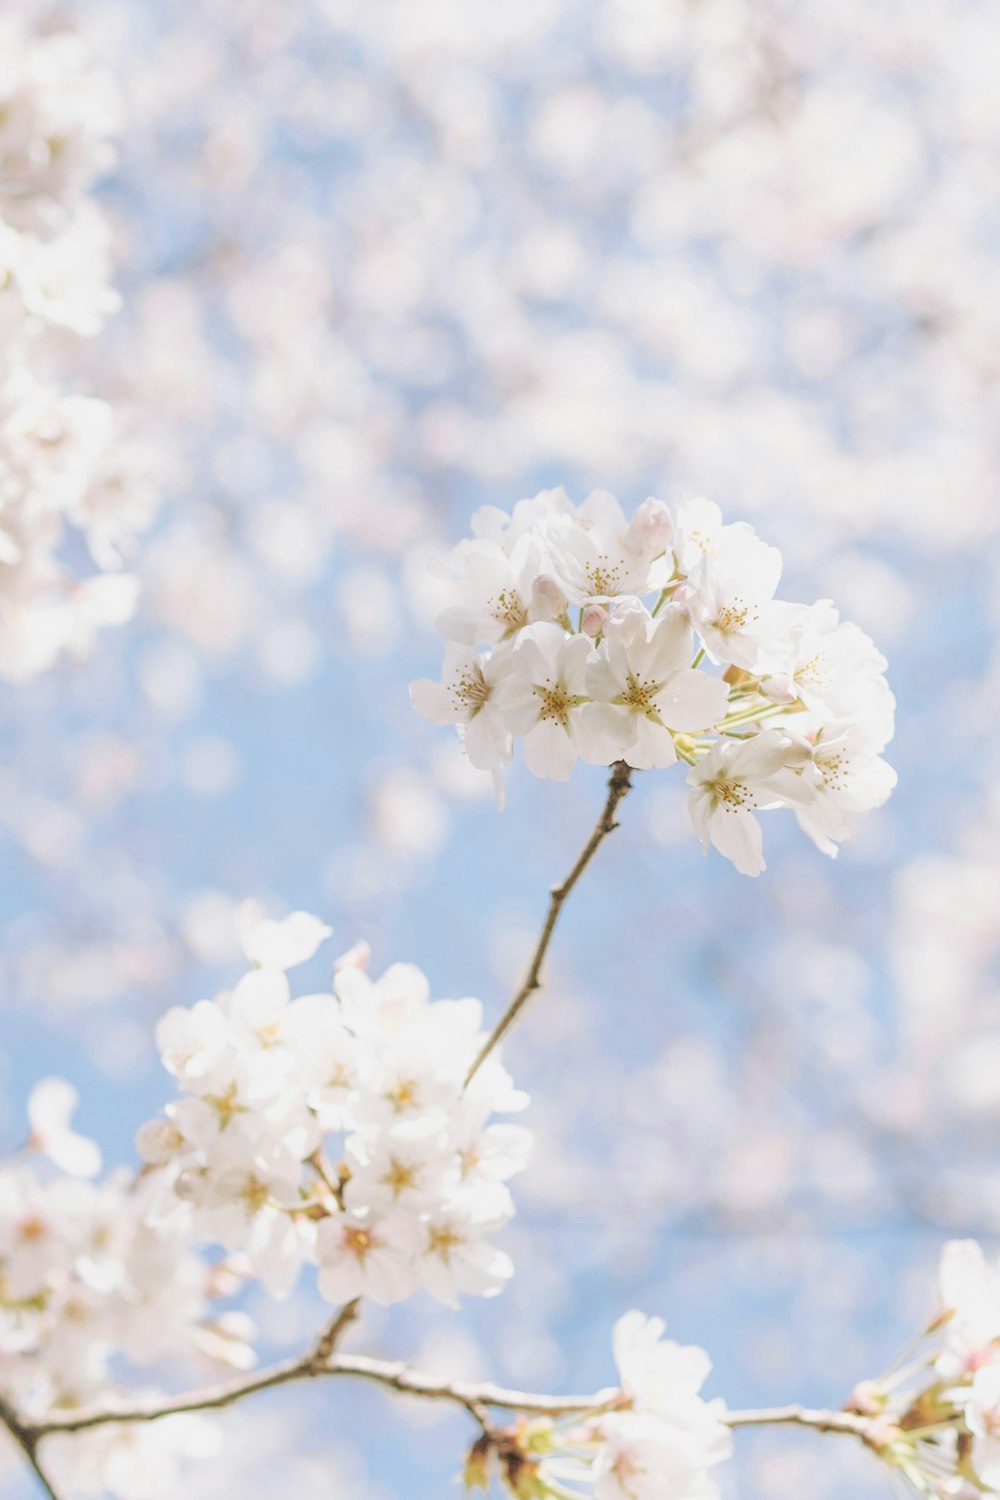 Spring Pictures  Download Free Images & Stock Photos on Unsplash